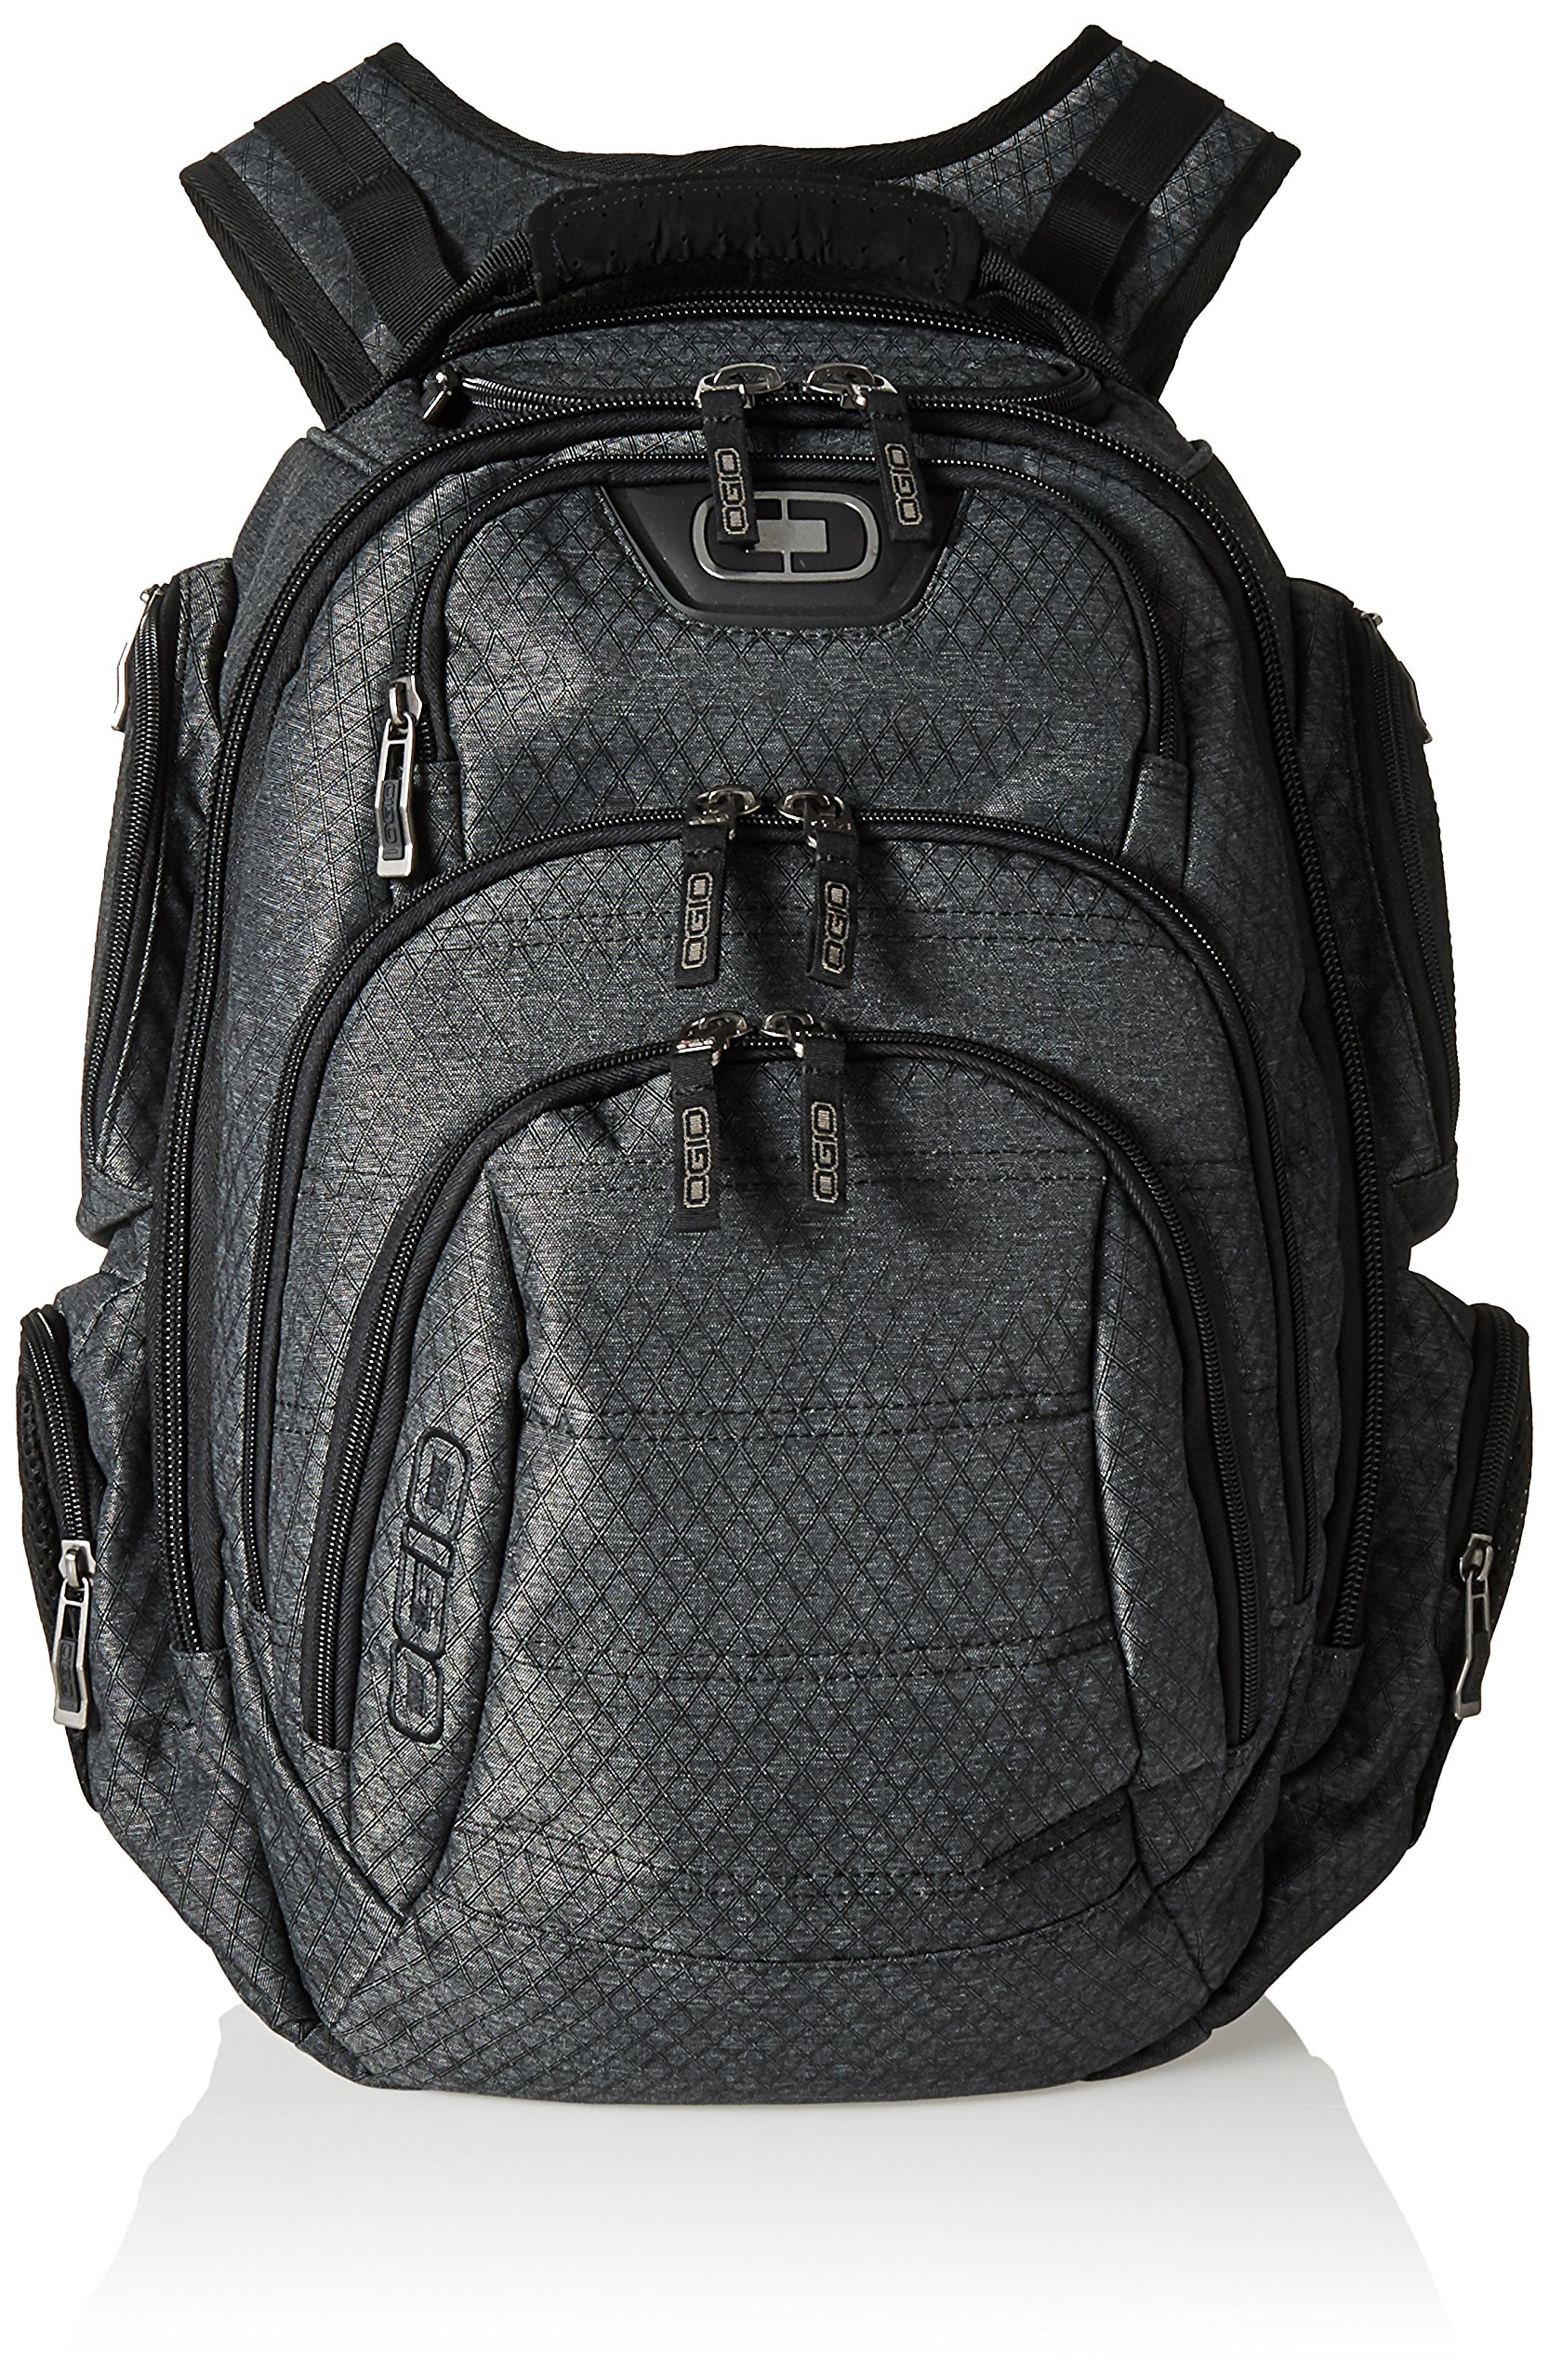 OGIO Gambit Laptop Backpack - グラファイト